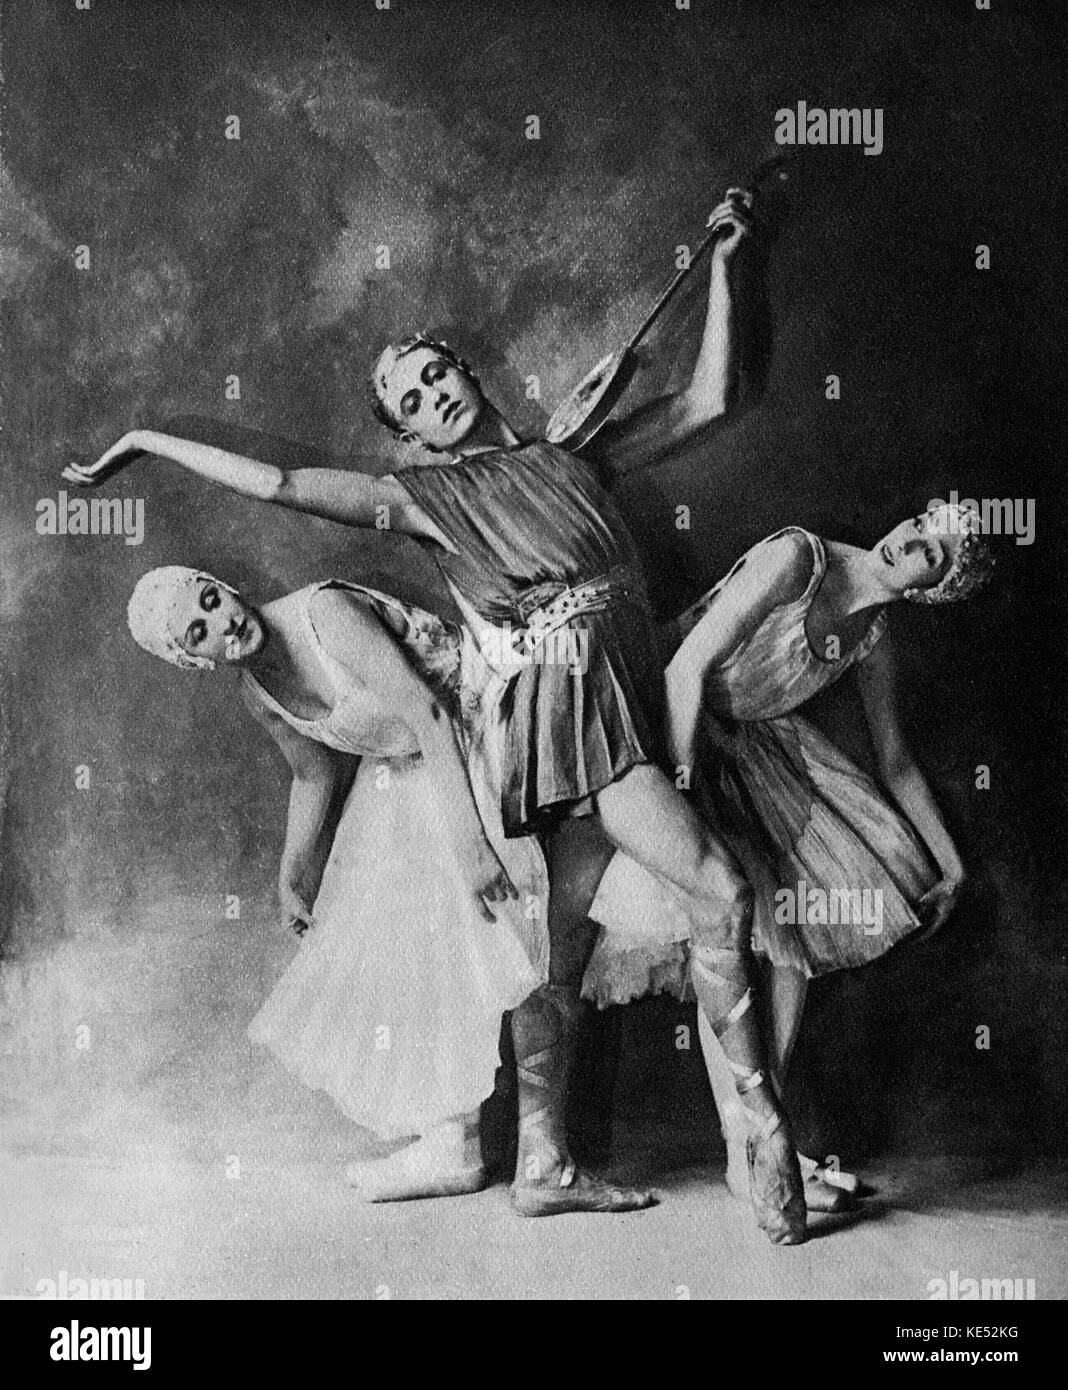 Serge Lifar, Cerniseva and Dobrowska in the ballet 'Apollon Musagète'. Choreography Balanchine (European production) and music by Igor Stravinsky, 1928. Première in New York (choreography Bolm). SL: Russian-French dancer, choreographer, director and writer, 1905-1986. Stock Photo